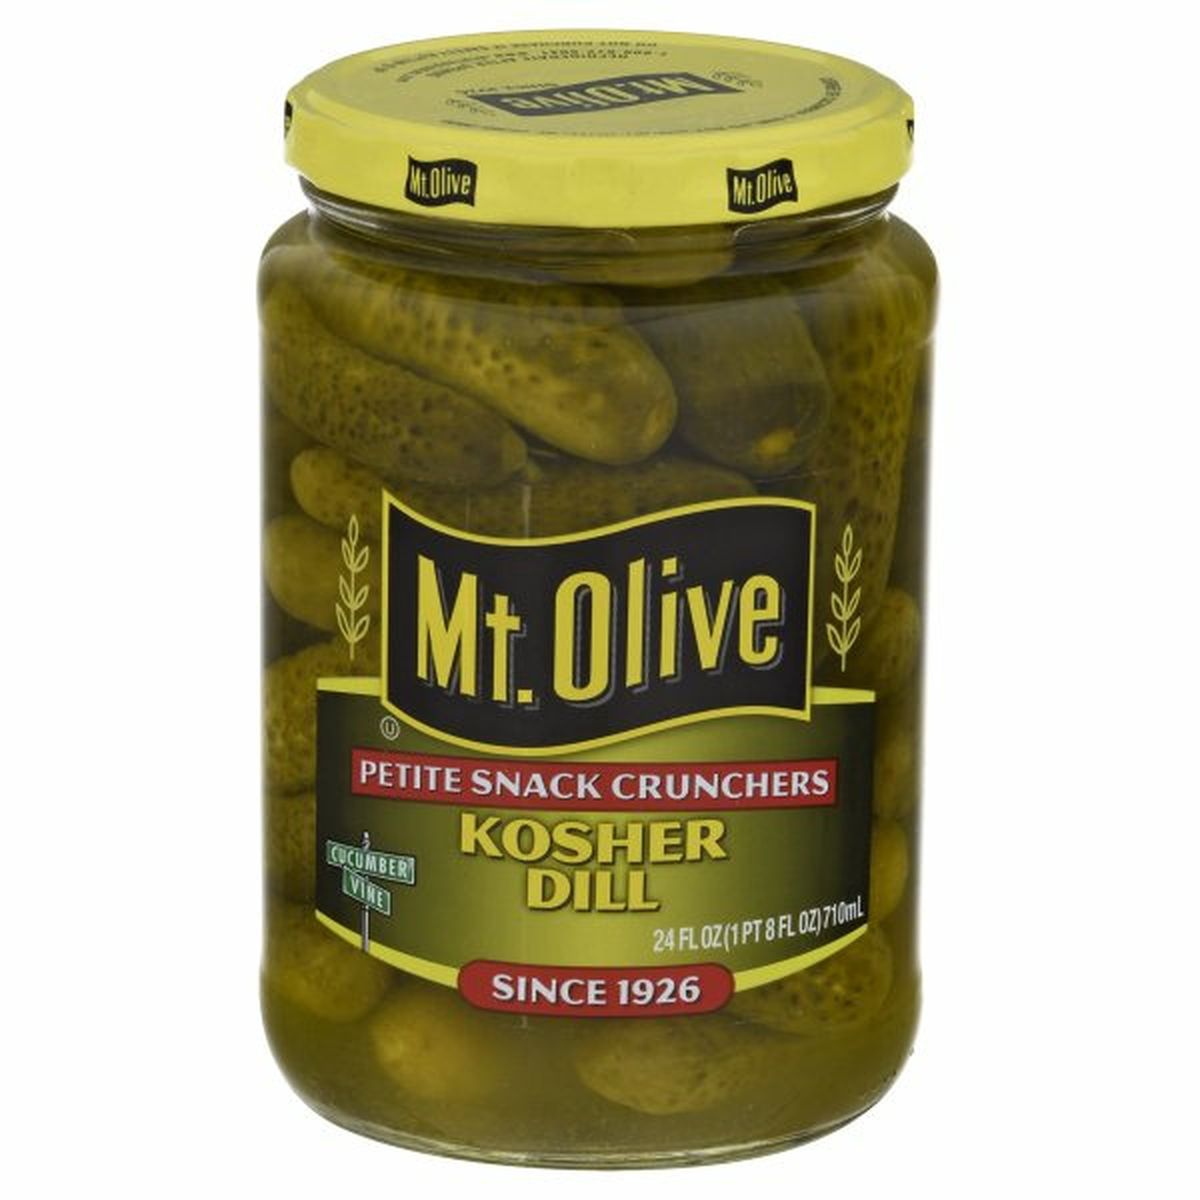 Calories in Mt. Olive Pickles, Kosher Dill, Petite Snack Crunchers